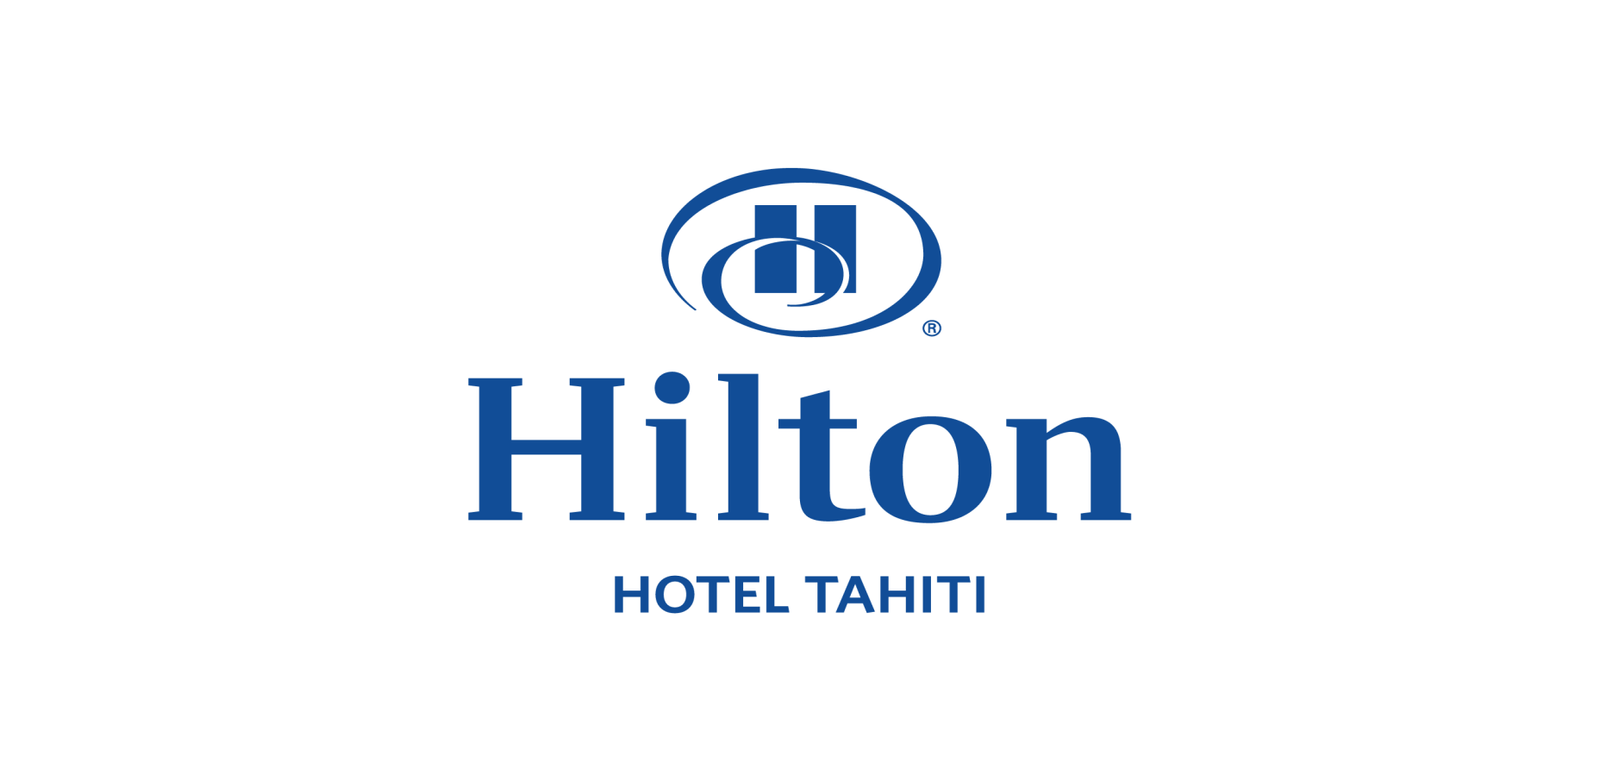 You are currently viewing Hilton Hotel Tahiti